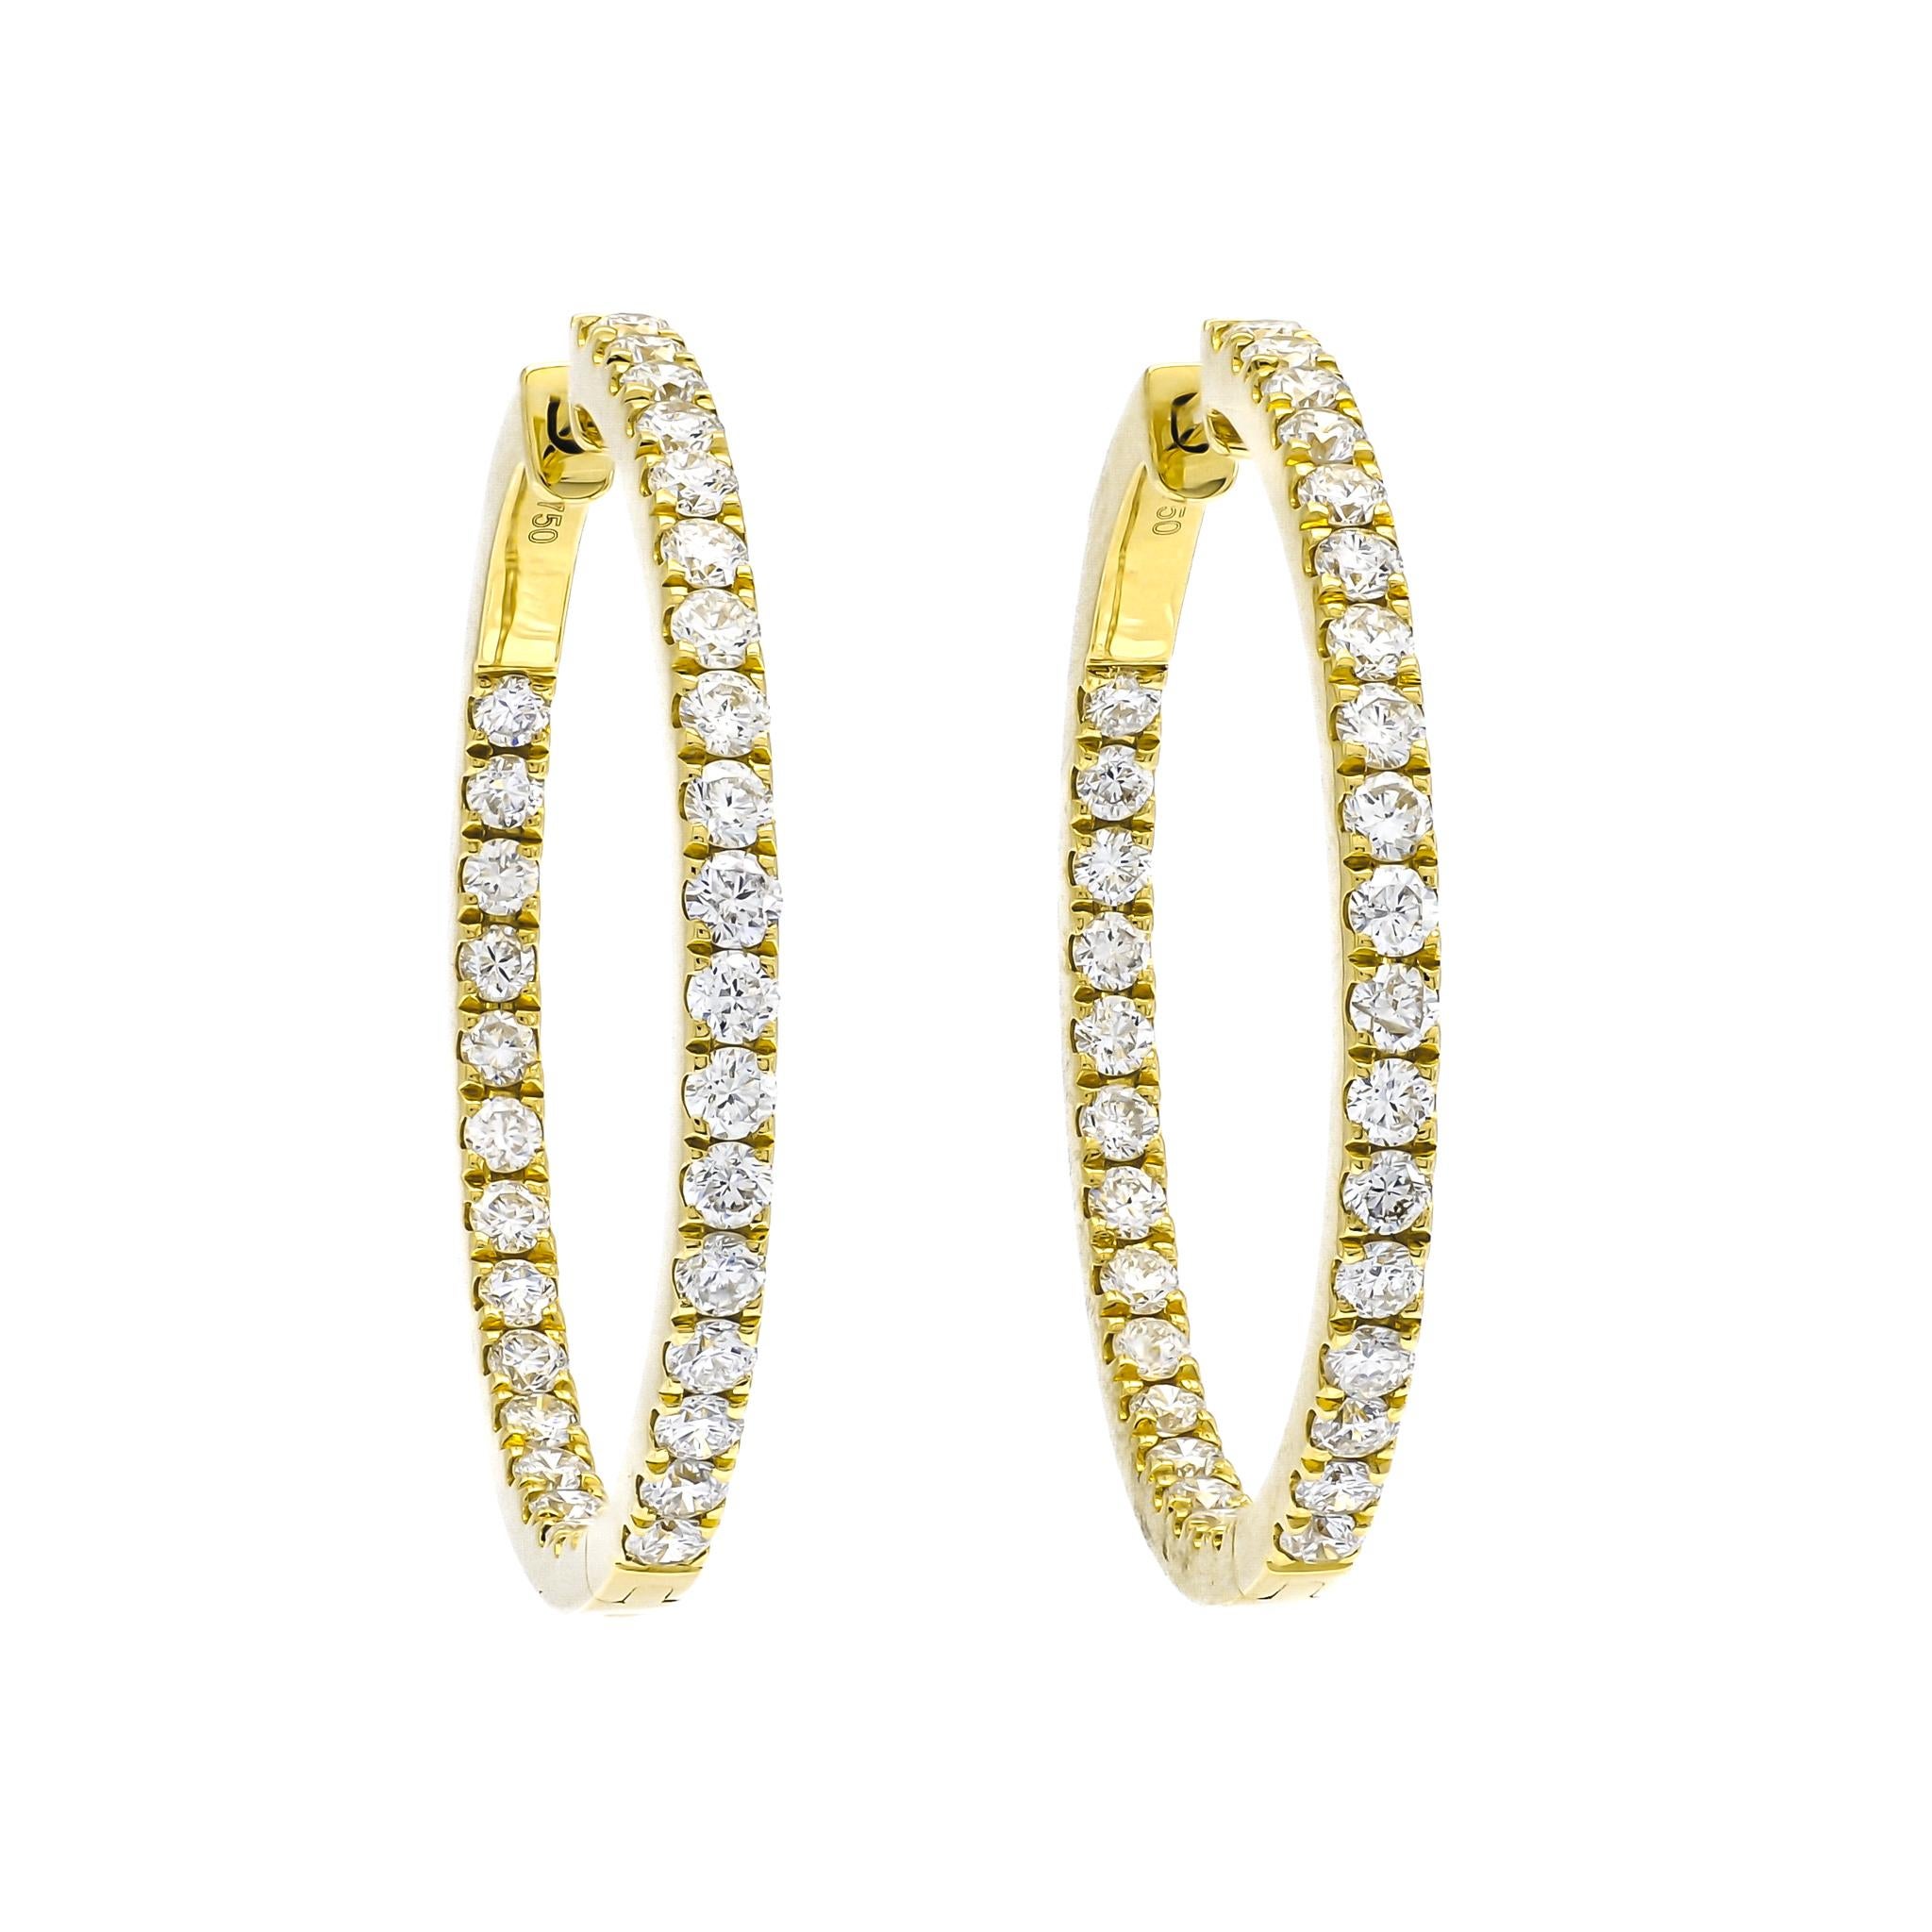 Brilliant Cut Natural Diamond 1.94CT 18Karat Yellow Gold Inside/Out Hoop Earrings For Sale